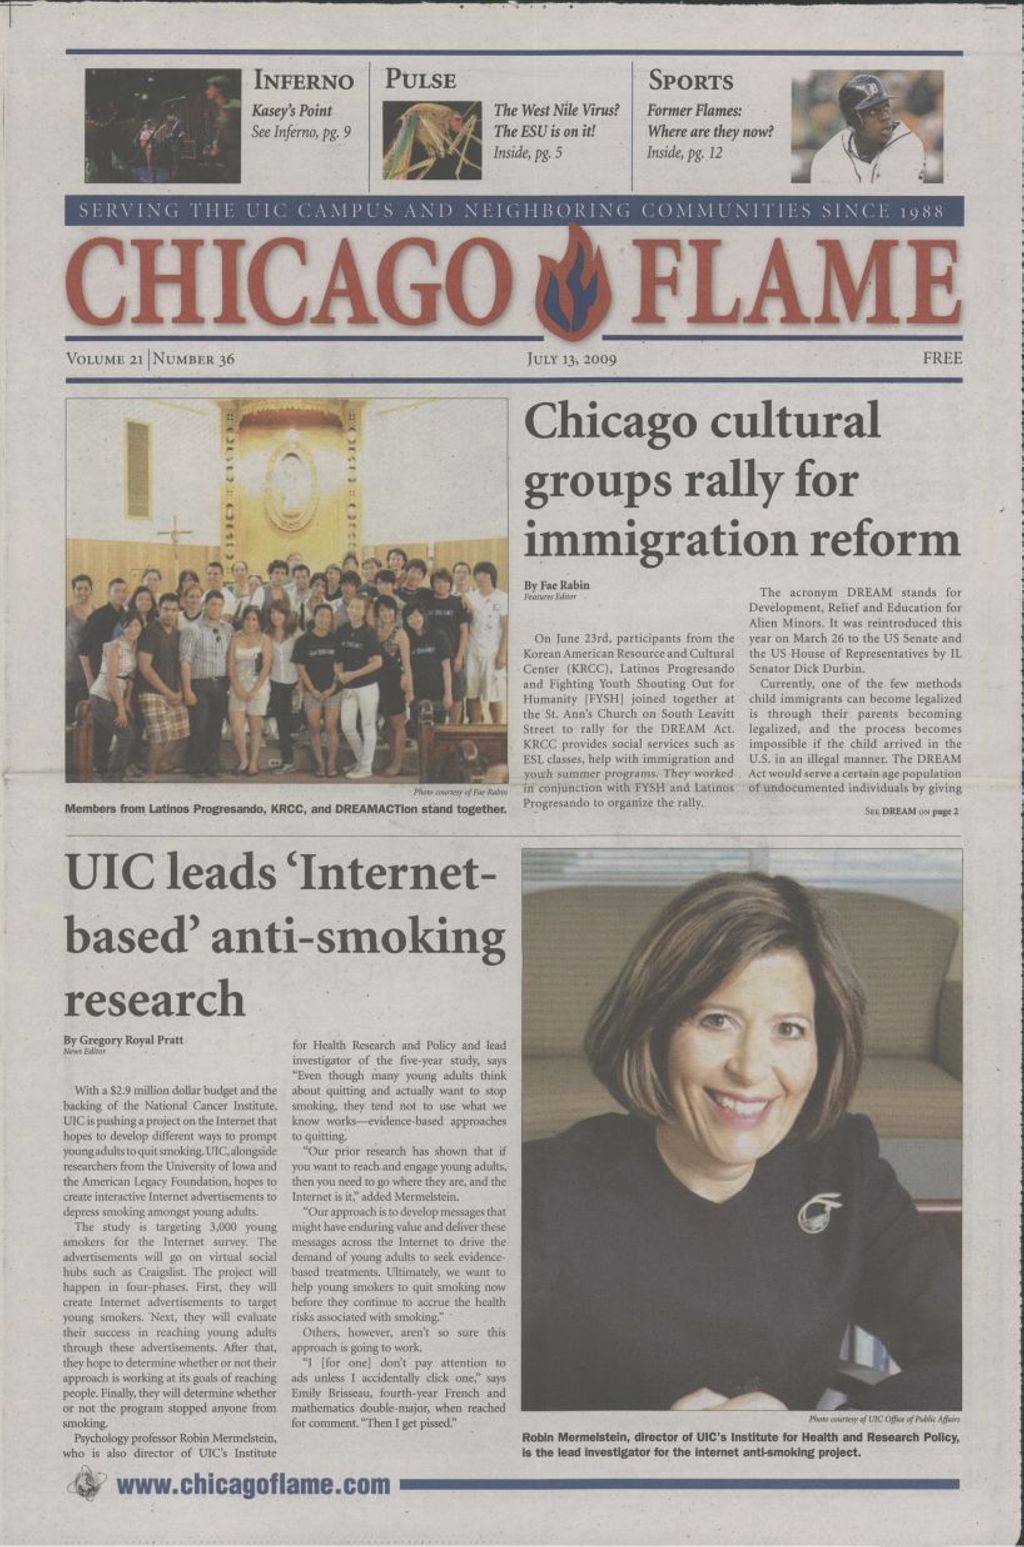 Miniature of Chicago Flame (July 13, 2009)